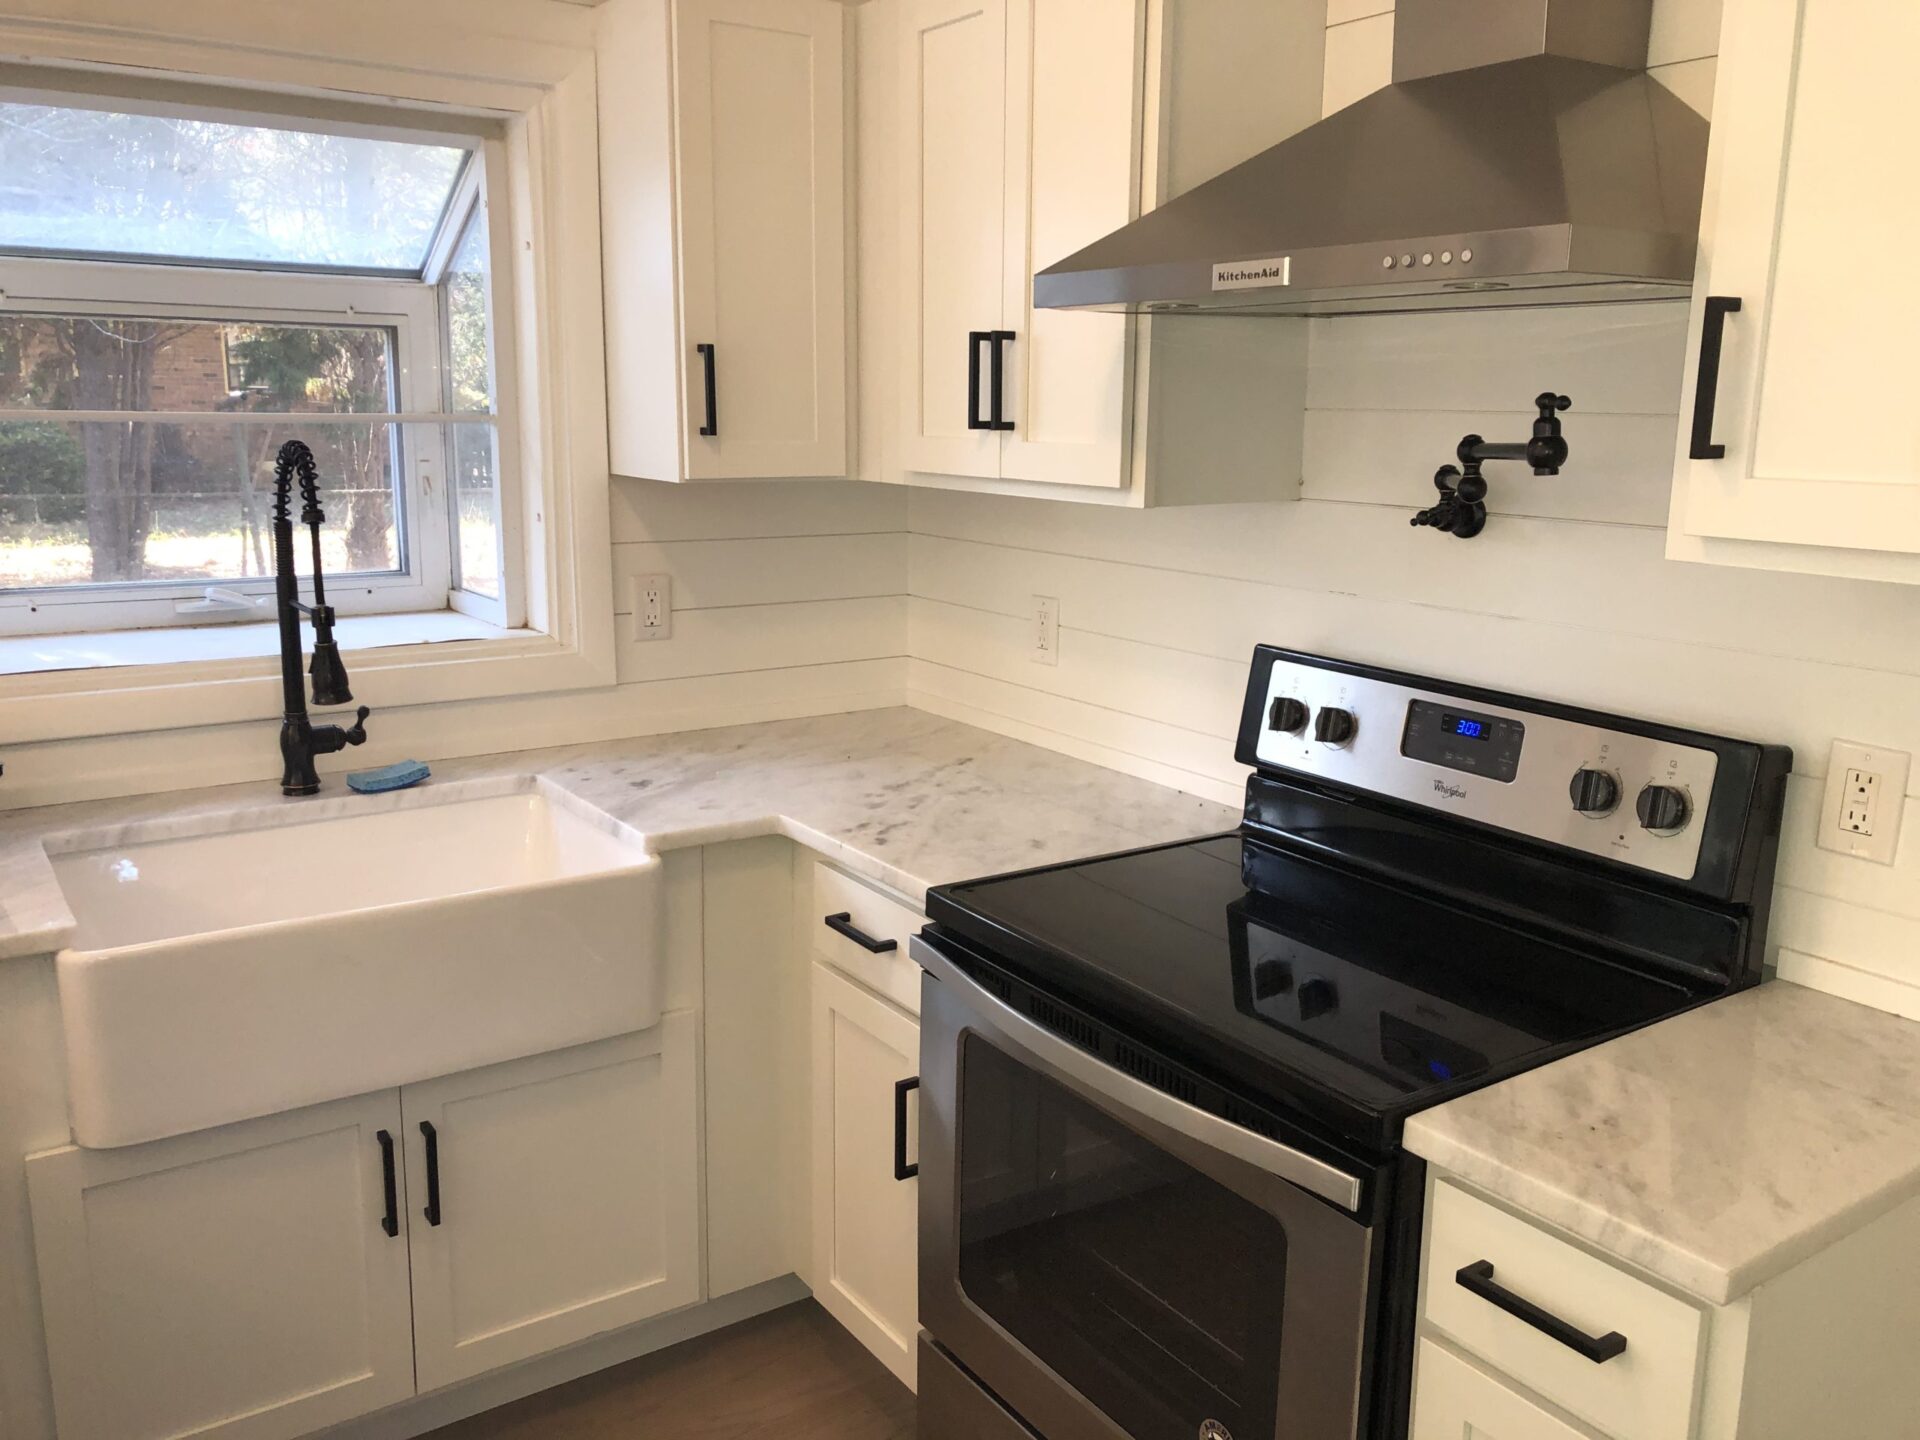 An inside image of the kitchen with white cabinets and black stove